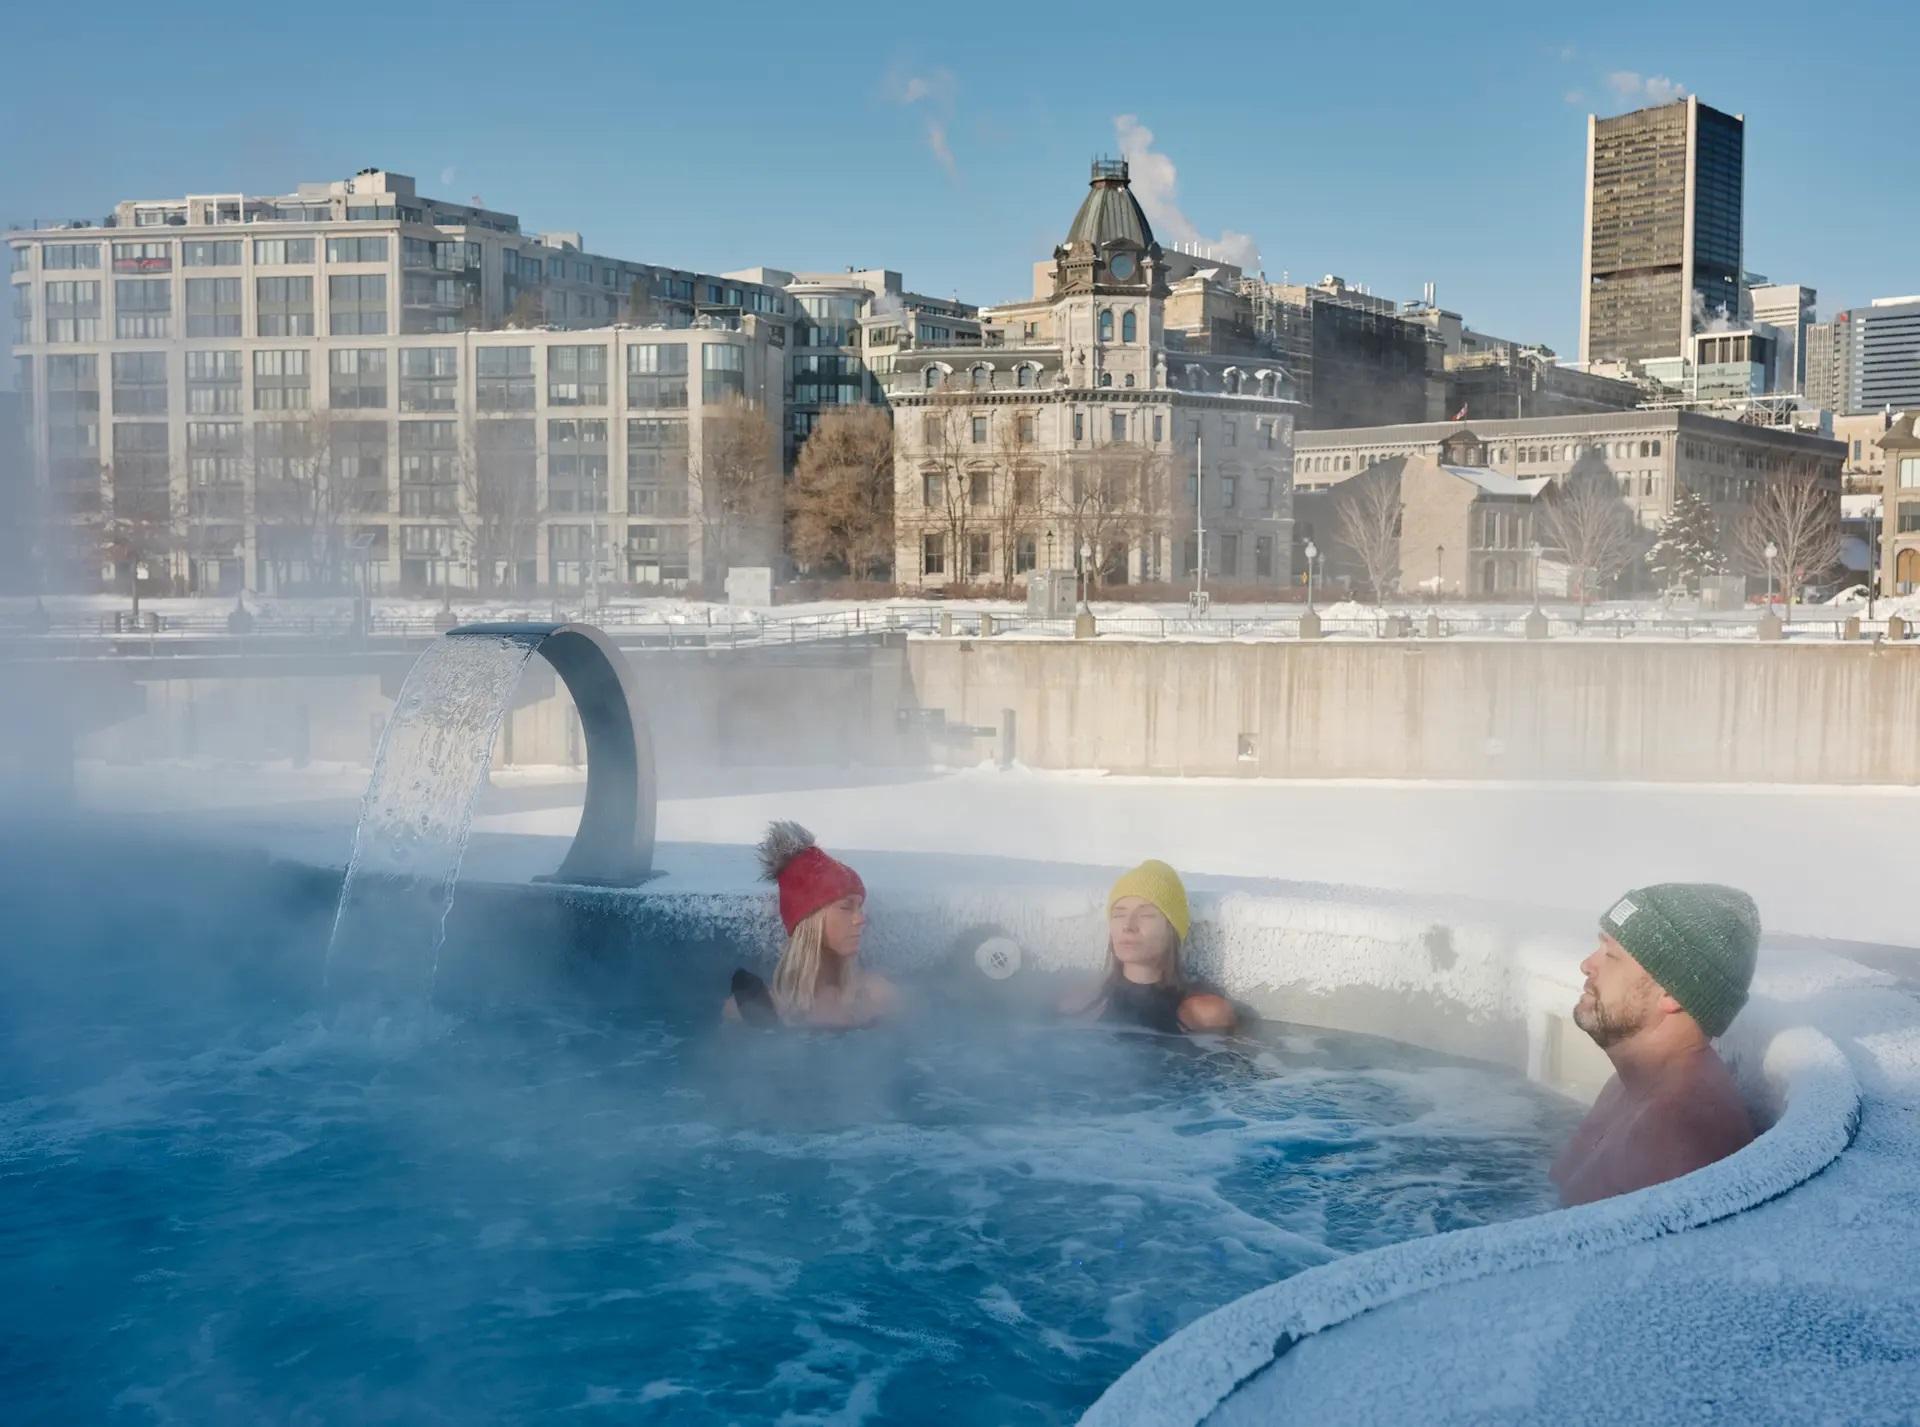 People keeping warm in a hot tub in Montreal